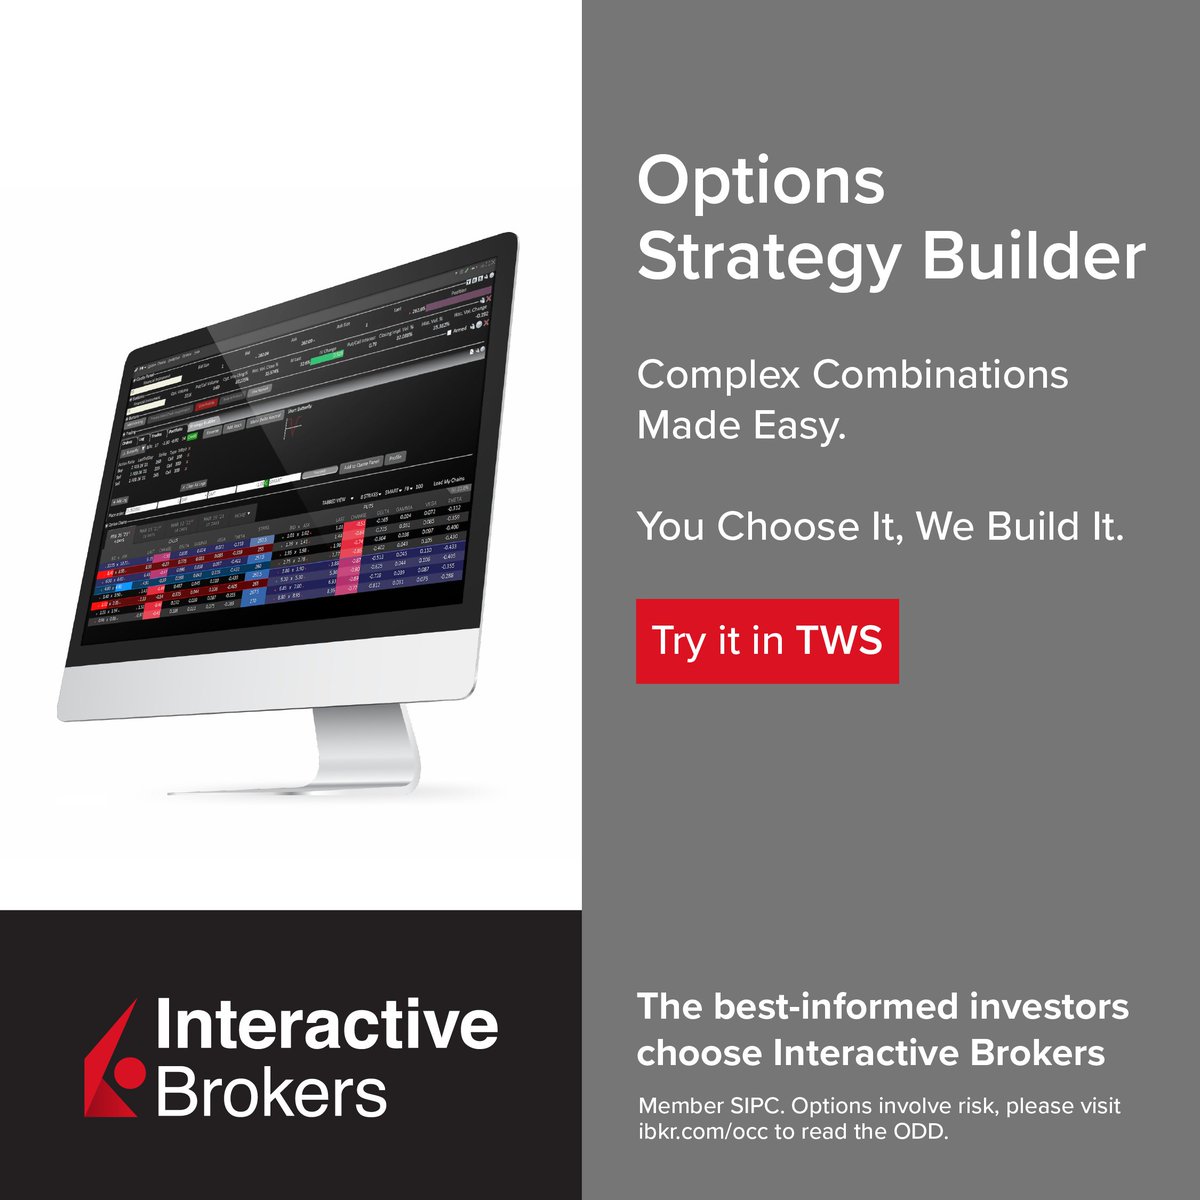 🛠️ You choose it, we build it. The Options Strategy Builder makes it easy to build complex multi-leg #options strategies. Try it out in #TWS: spr.ly/stratbt